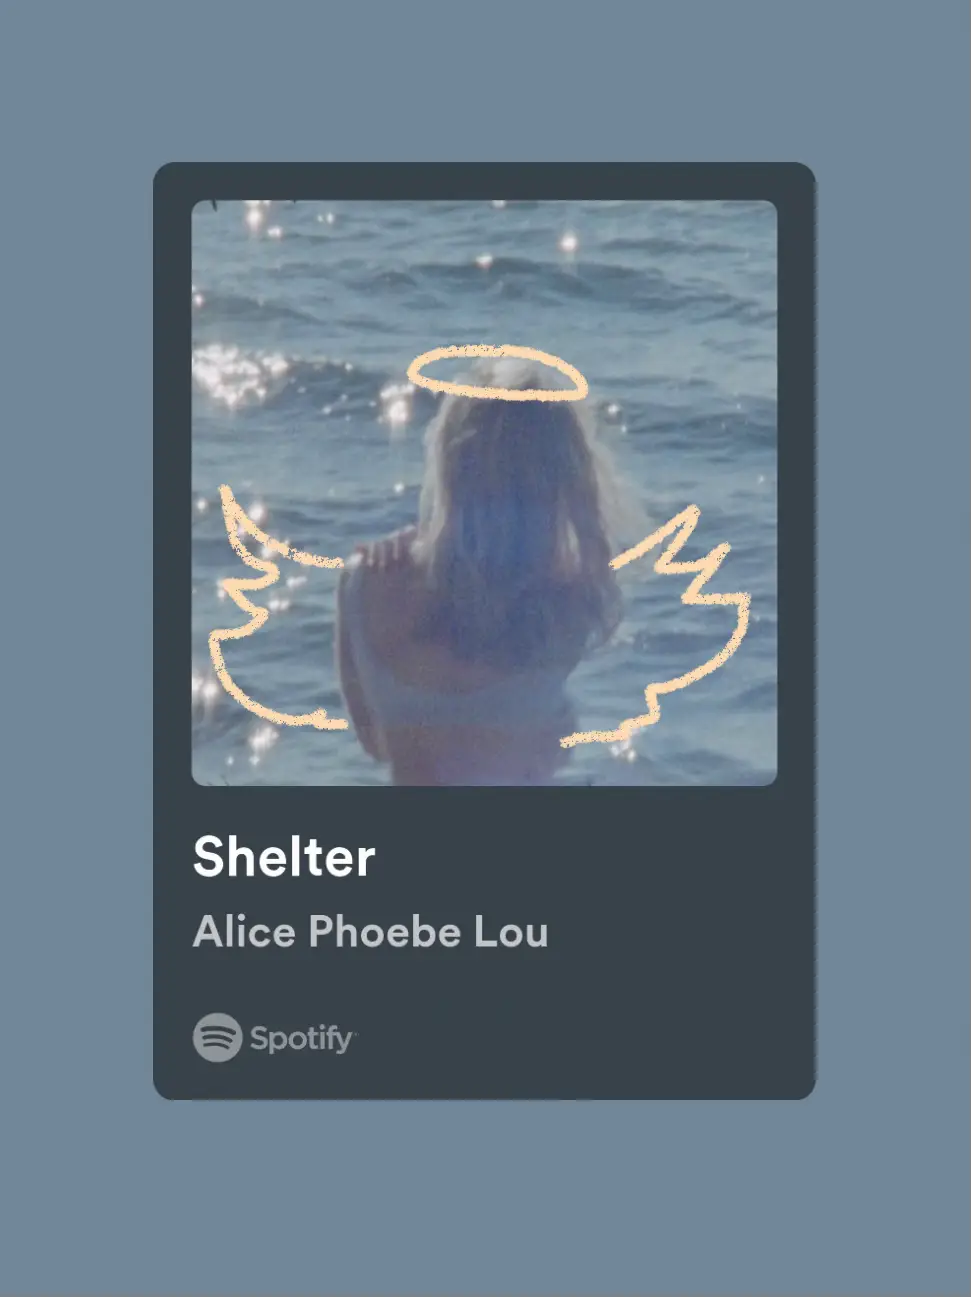  A Spotify ad for Alice Phoebe Lou.